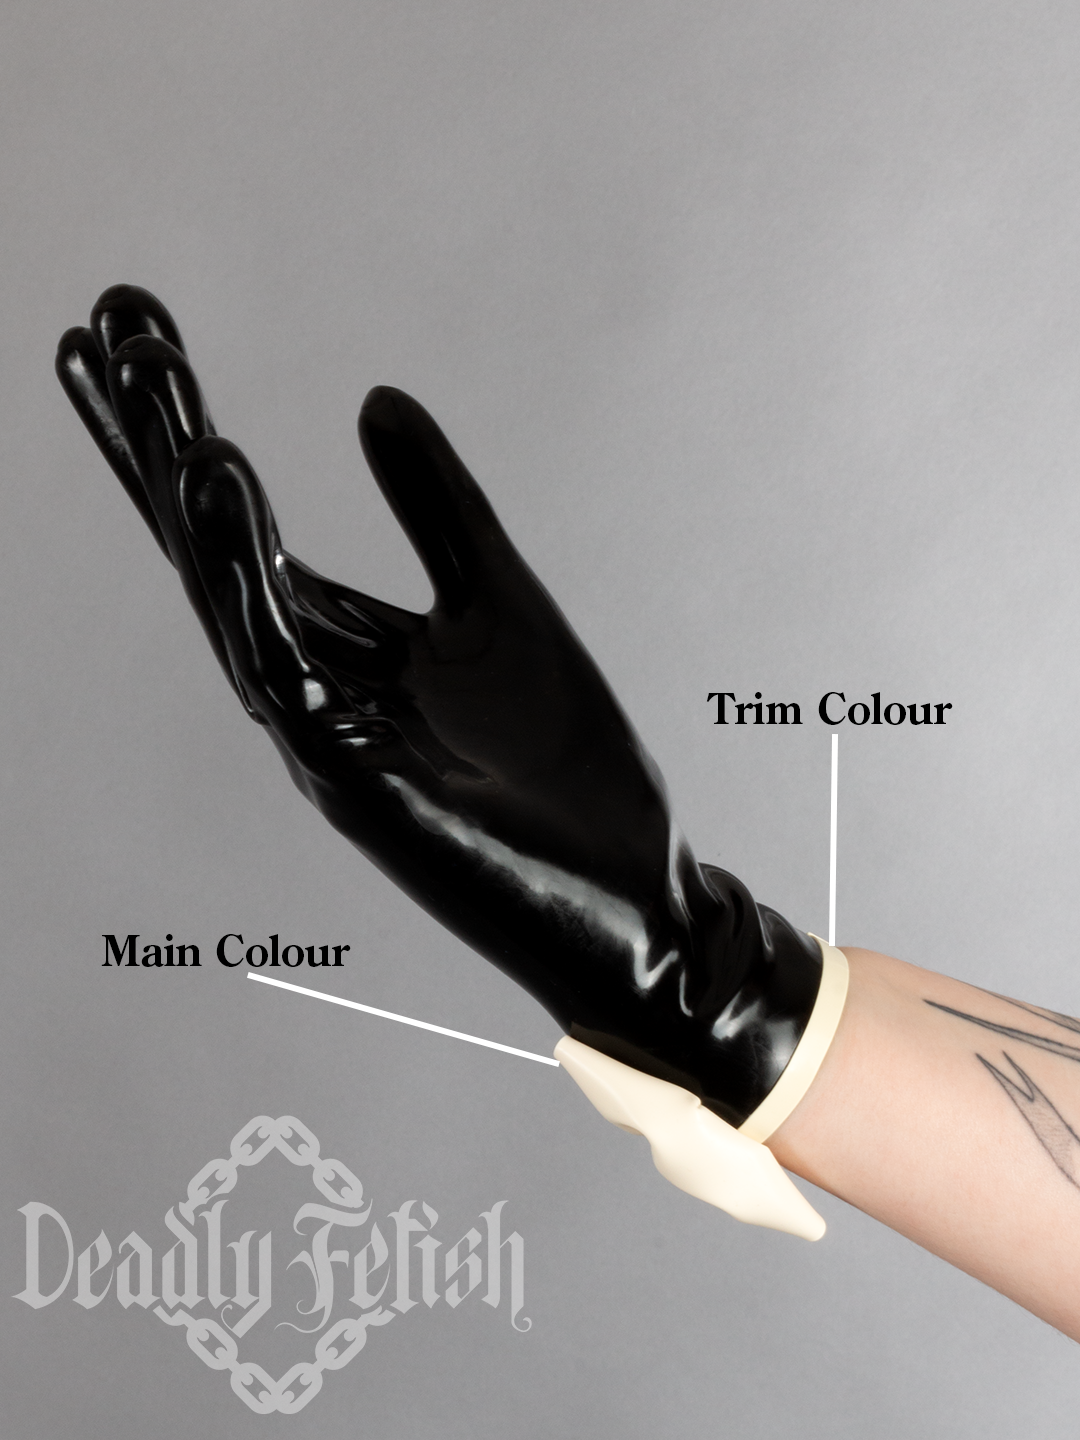 Deadly Fetish Made-To-Order Latex: Gloves With Bows